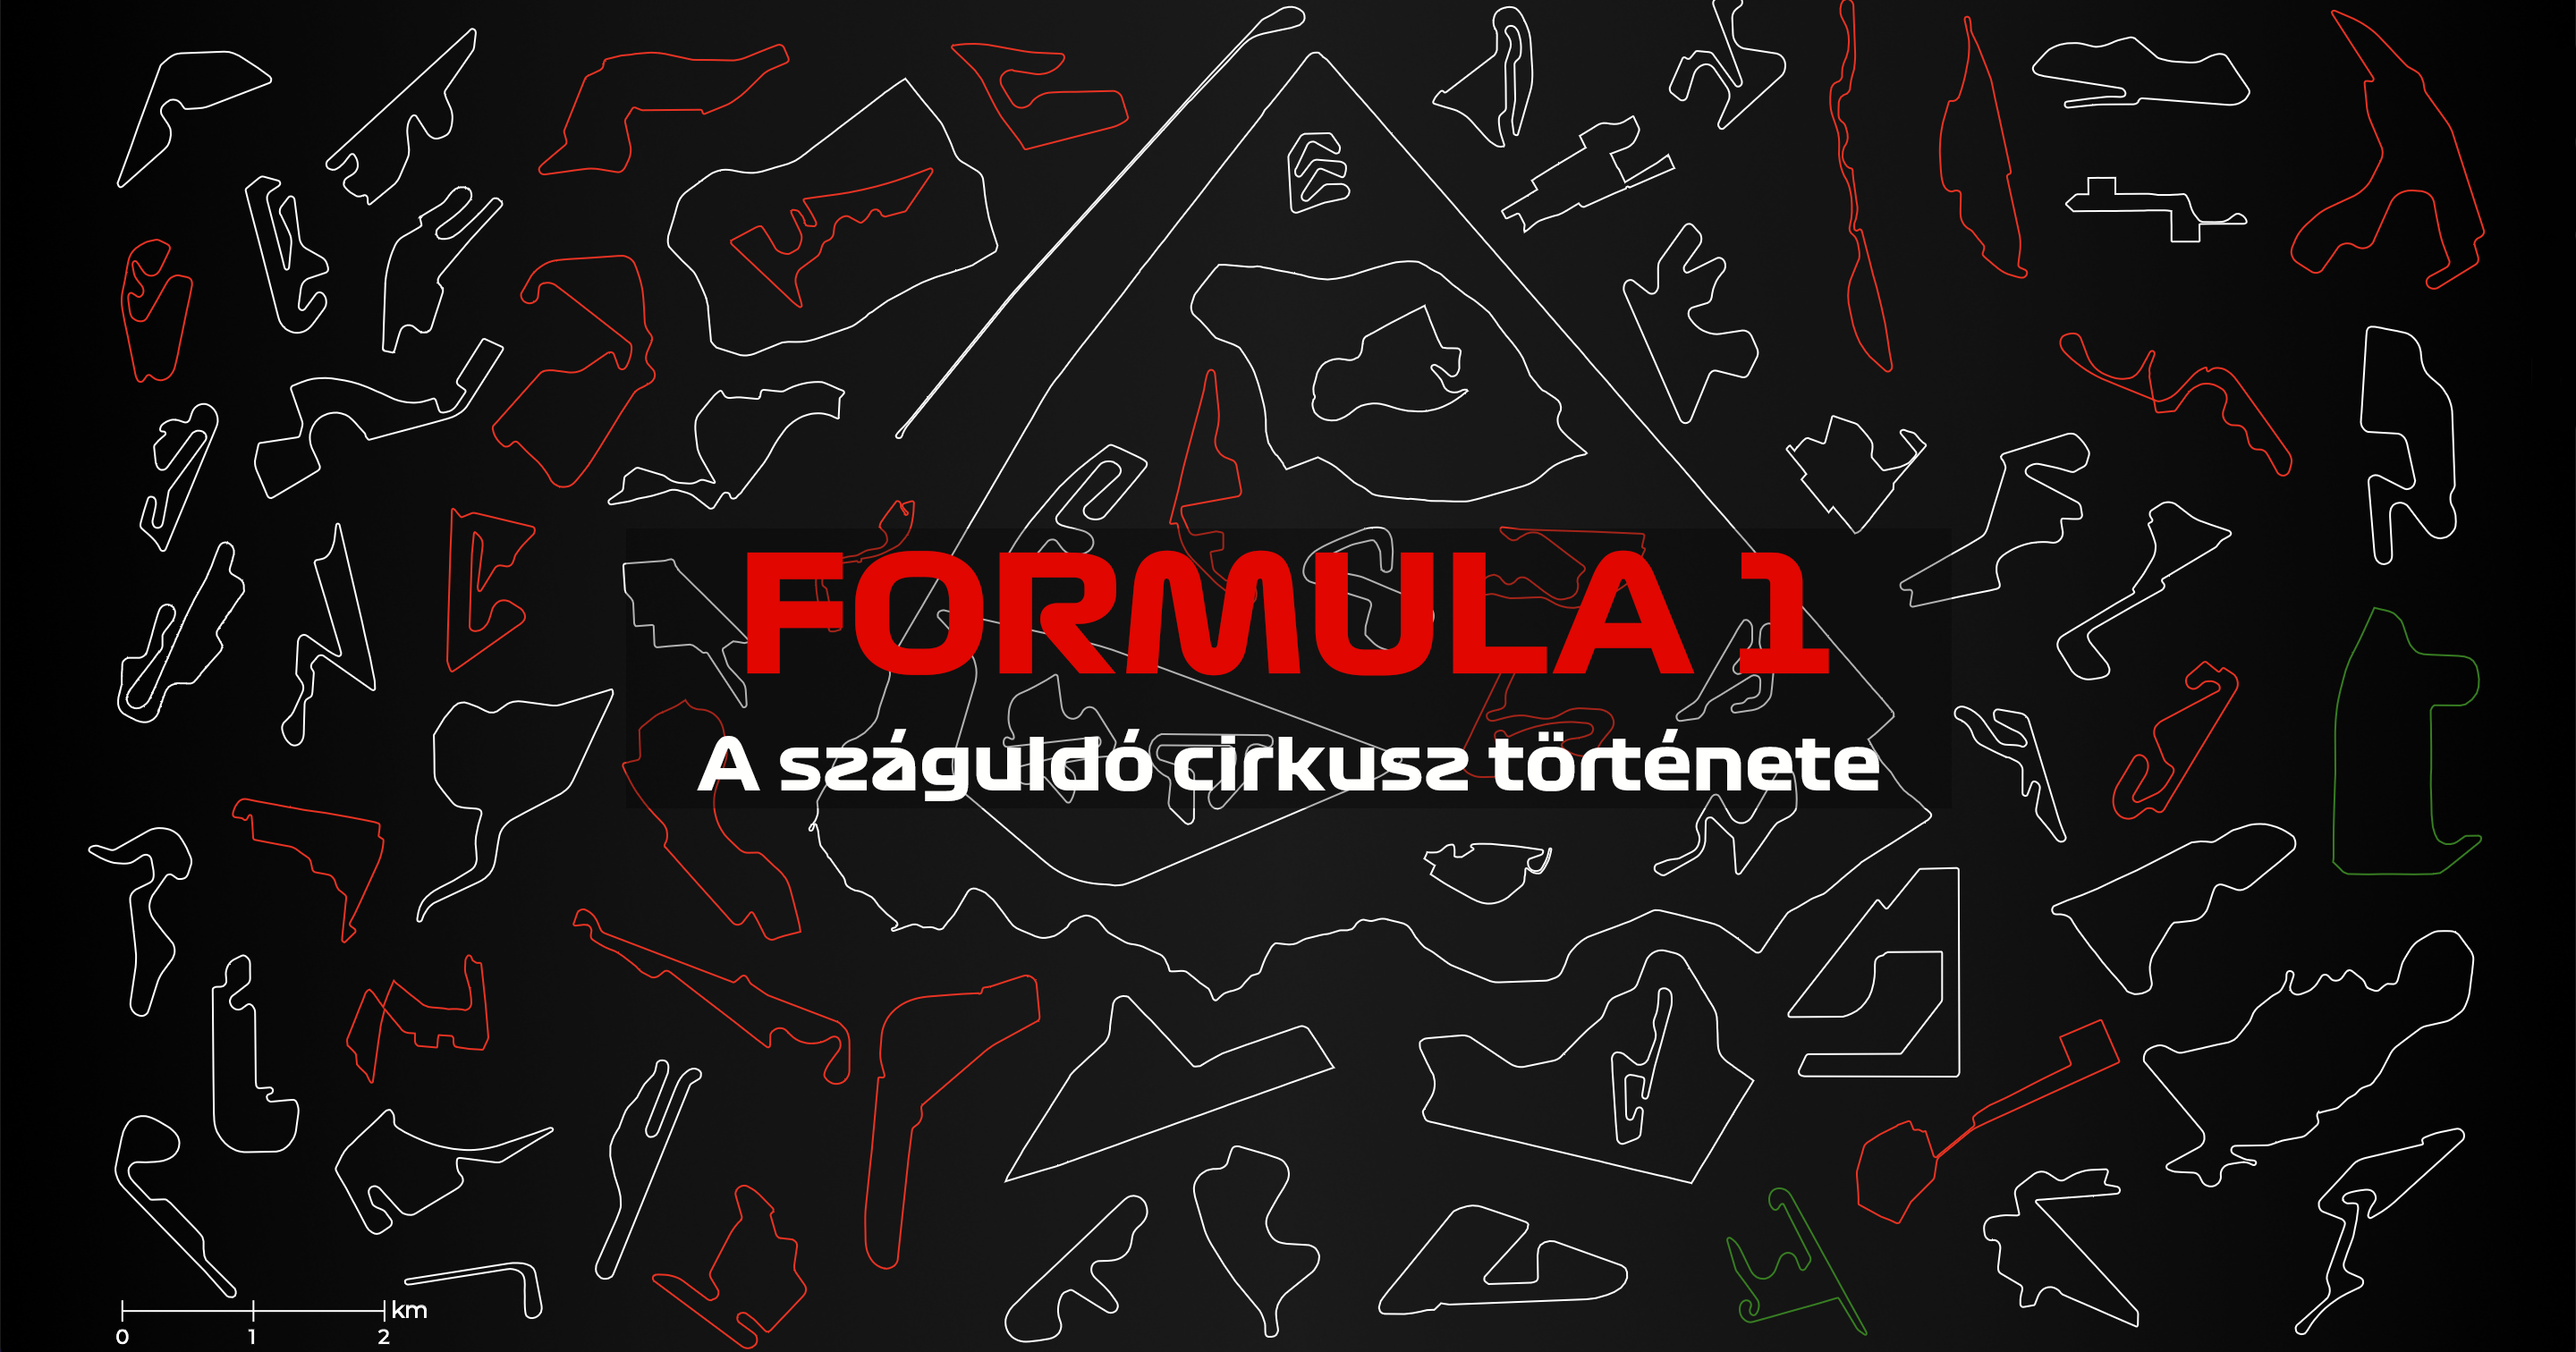 34 world champions, 112 winners, 76 racetracks – see the history of Formula 1 on our latest interactive site